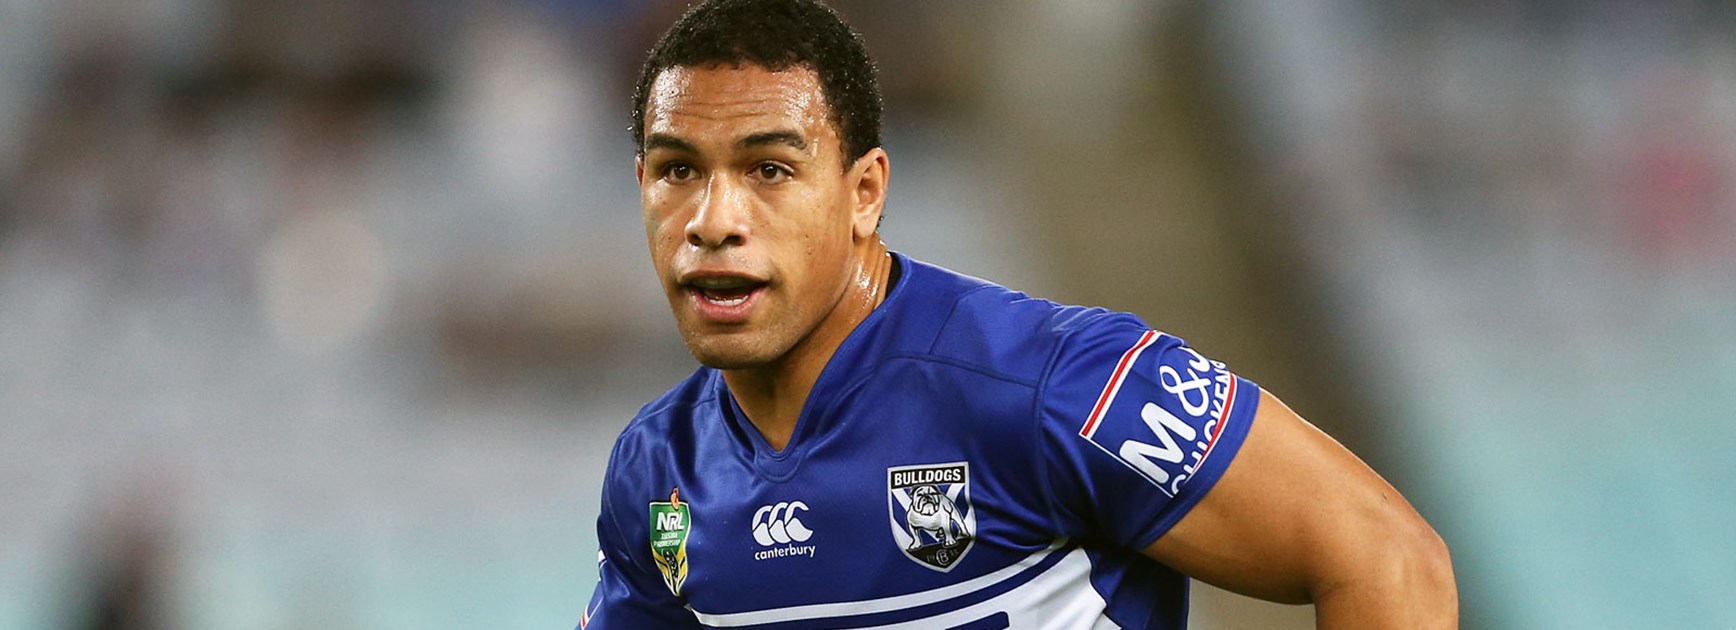 Bulldogs fullback Will Hopoate against the Tigers in Round 18.